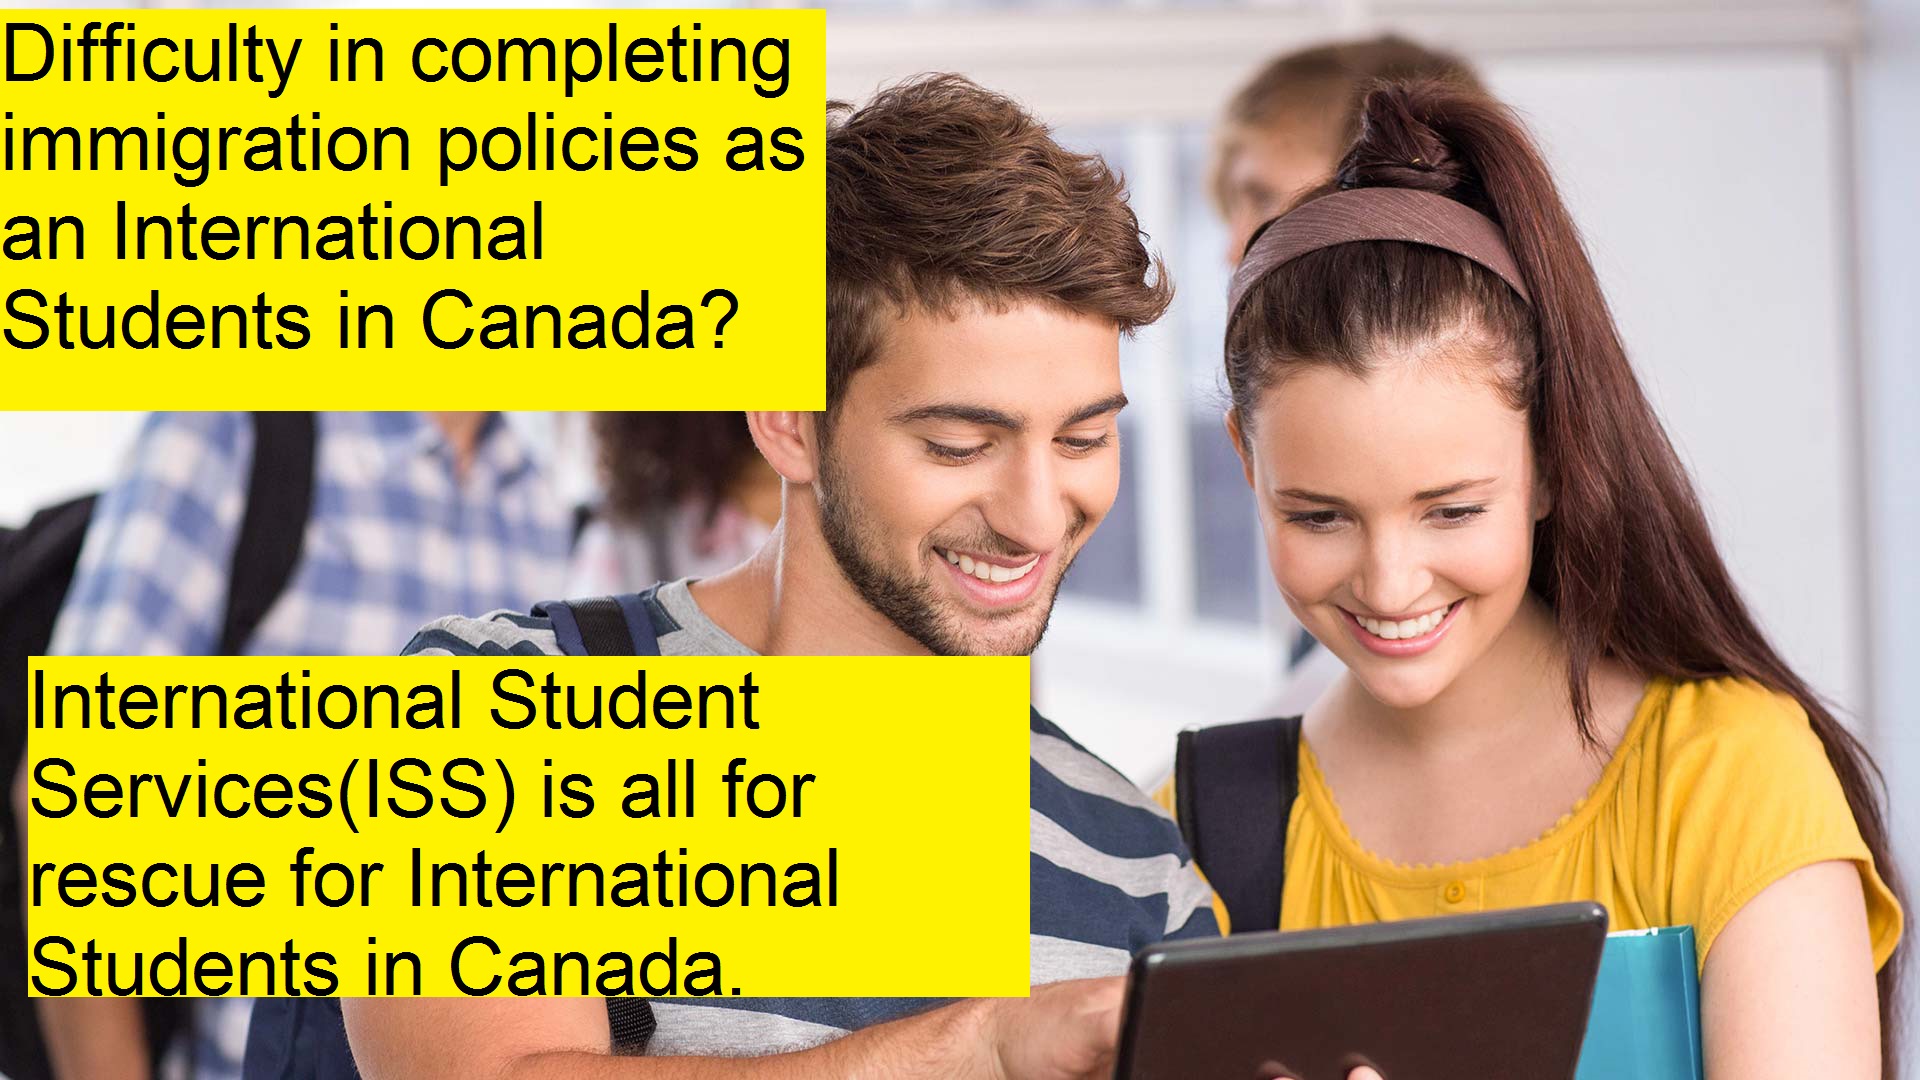 Questioning the future of International Students in Canada